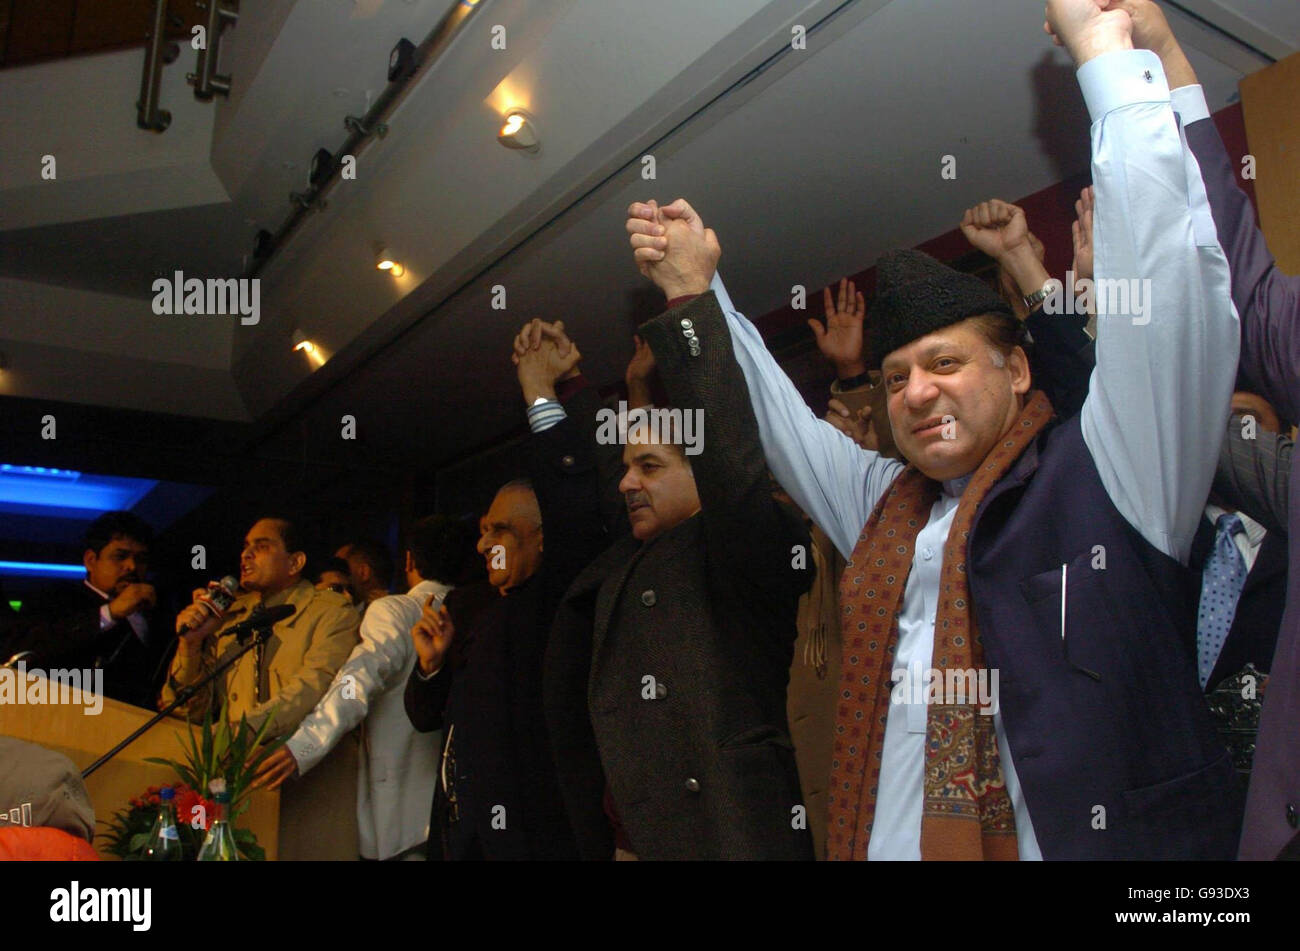 Former Prime Minister of Pakistan Nawaz Sharif (right) on stage with supporters inside Baylis House in Slough, Berkshire, Sunday January 29, 2006. Mr Sharif flew into Britain this evening from Saudi Arabia where he has been in exile for the past five years. Mr Sharif was ousted from power during a military coup in Pakistan in October 1999. Watch for PA story POLITICS Sharif. PRESS ASSOCIATION photo. Photo credit should read: Johnny Green/PA. Stock Photo